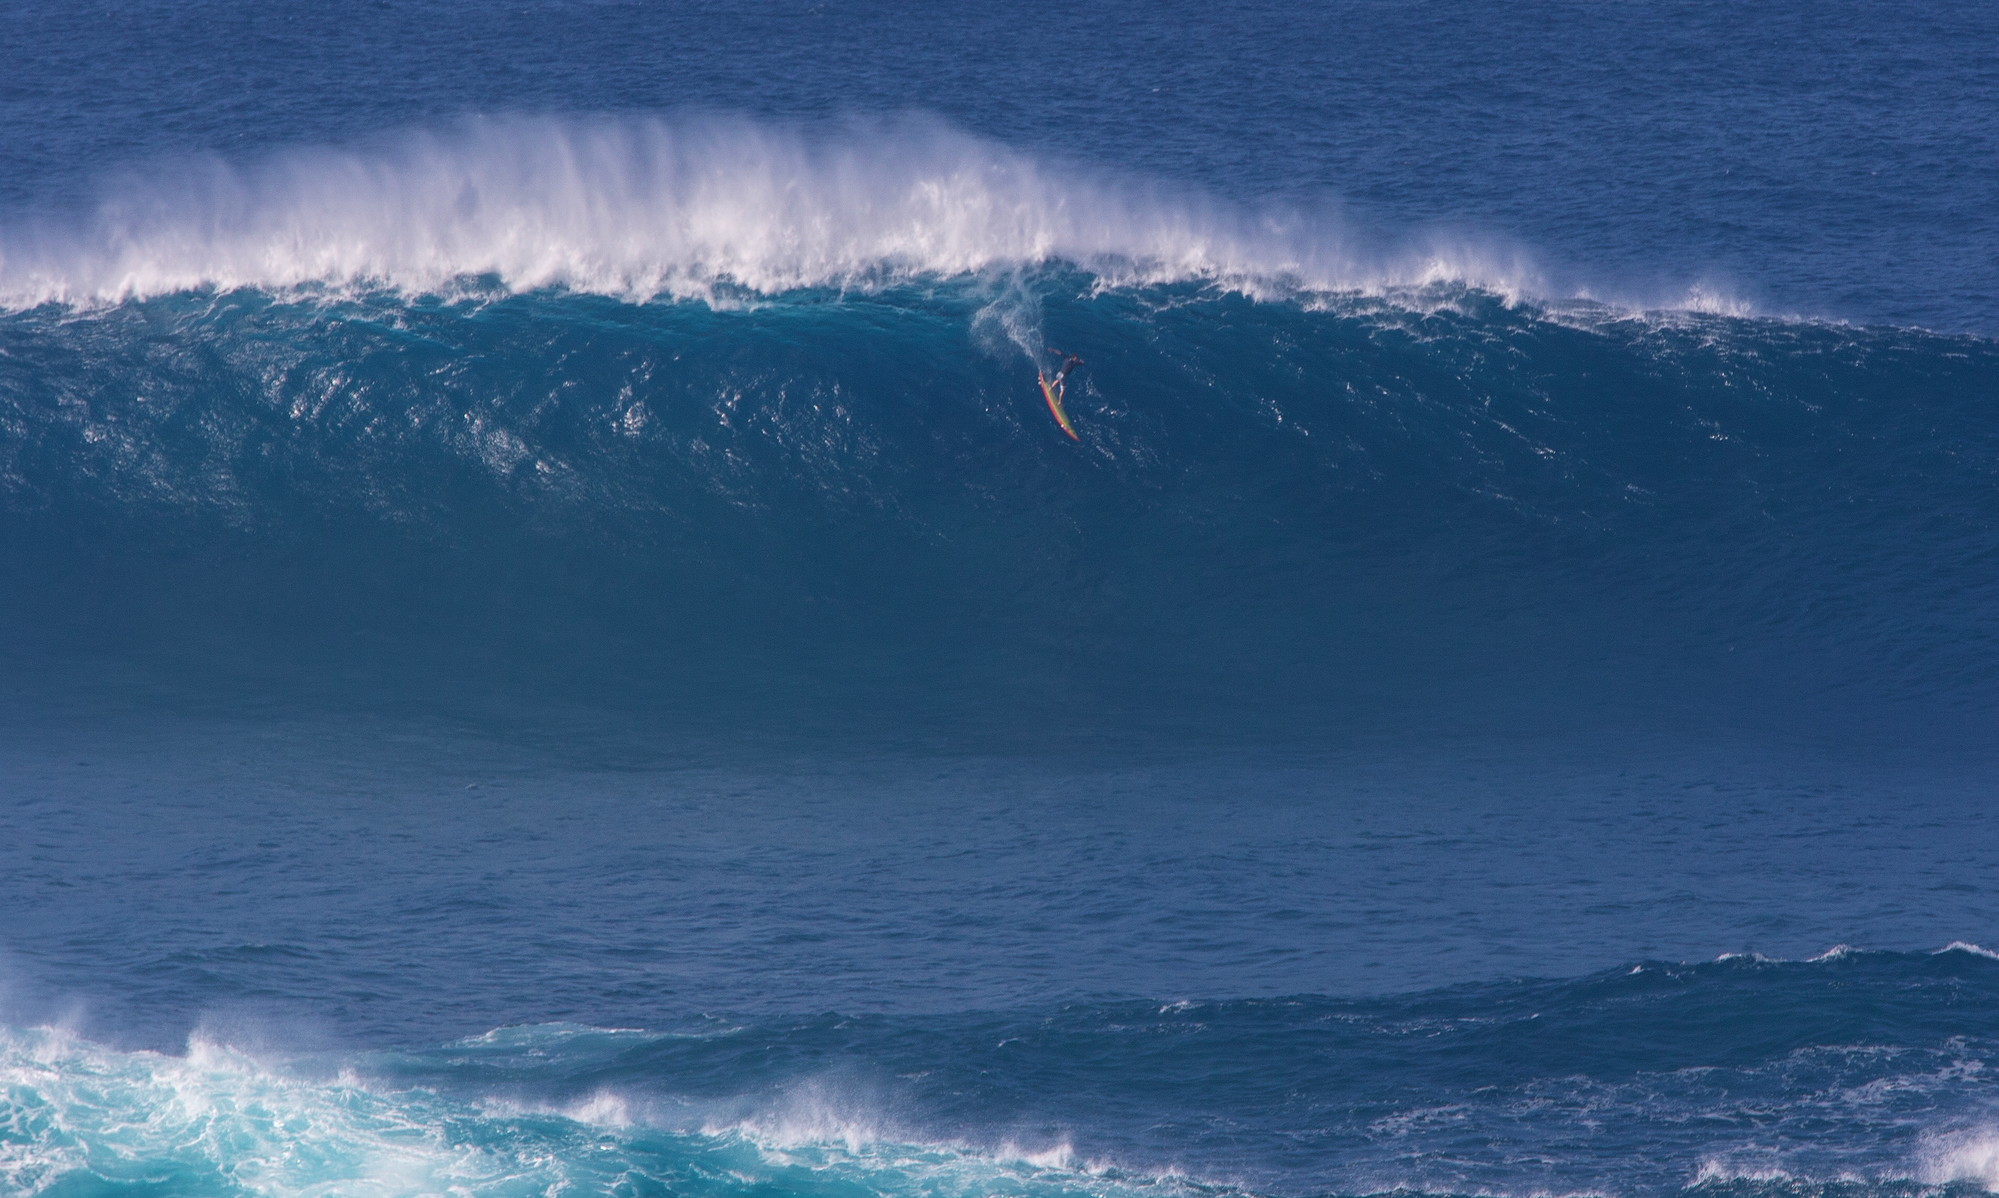 Will Skudin ended his season on a high note in Maui, where he took advantage of monstrous waves at Jaws in February, during what he described as the year’s biggest Pacific swell. (Courtesy Ricardo Estevez)